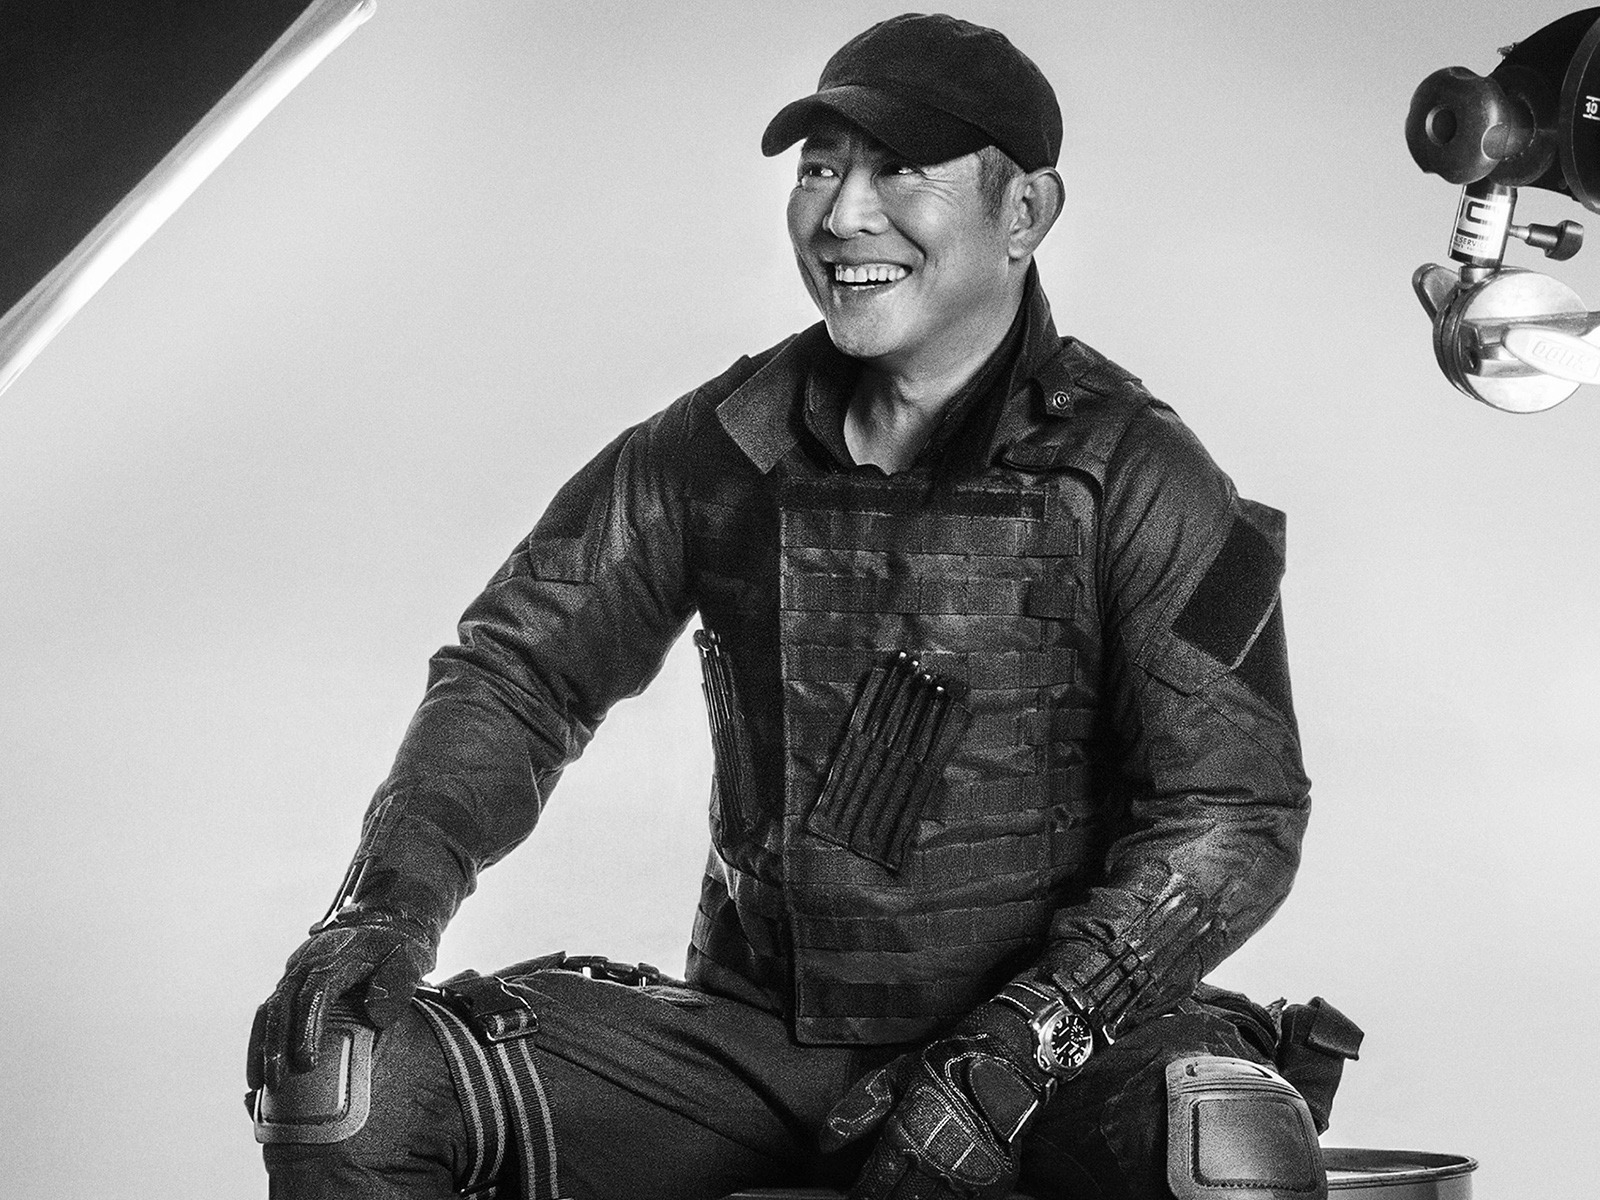 Jet Li The Expendables 3 for 1600 x 1200 resolution